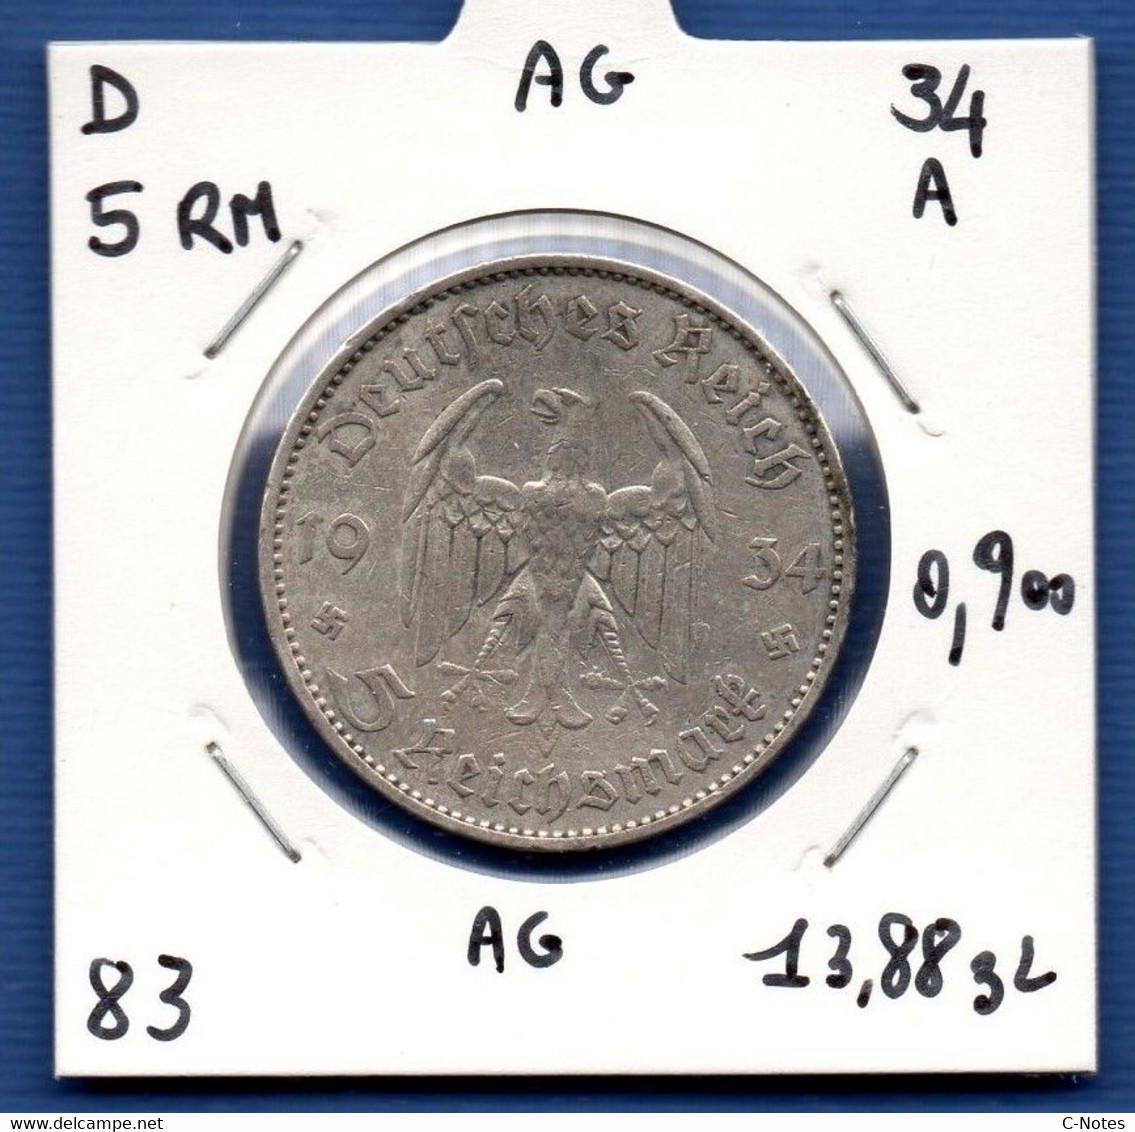 GERMANY - 5 Reichsmark 1934 A -  See Photos - SILVER - Km 83 - 5 Reichsmark